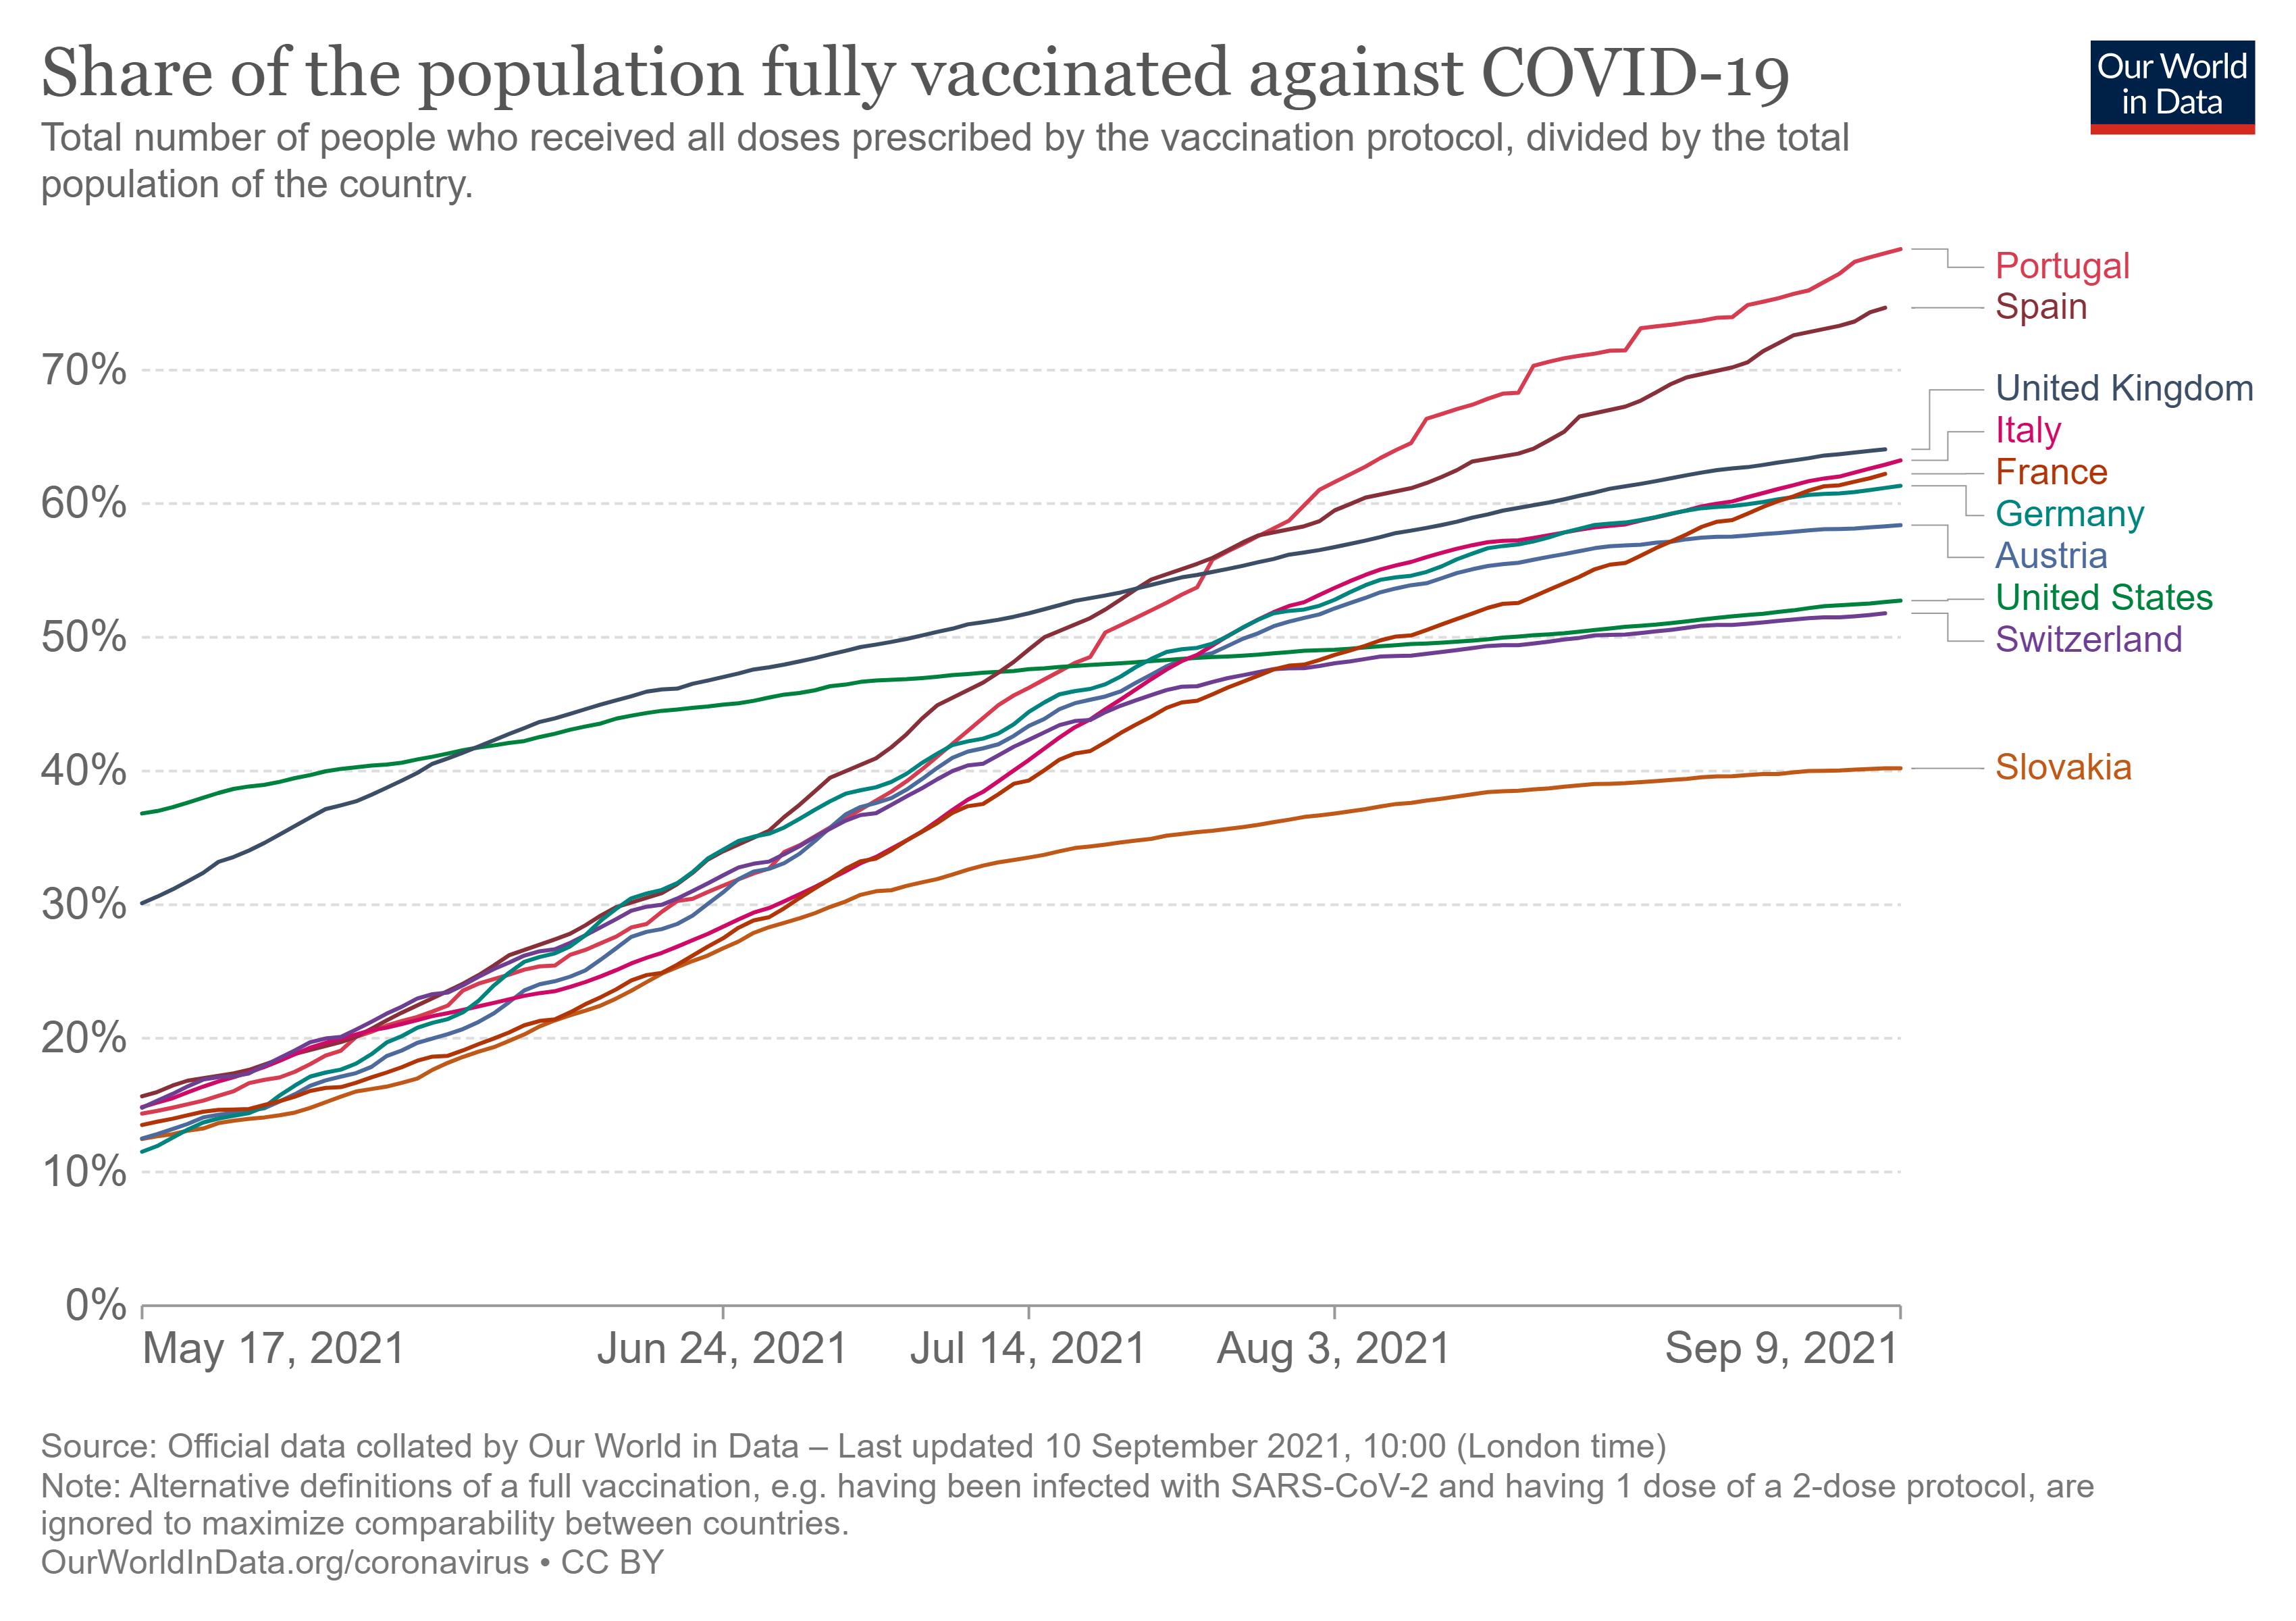 share-people-fully-vaccinated-covid.png